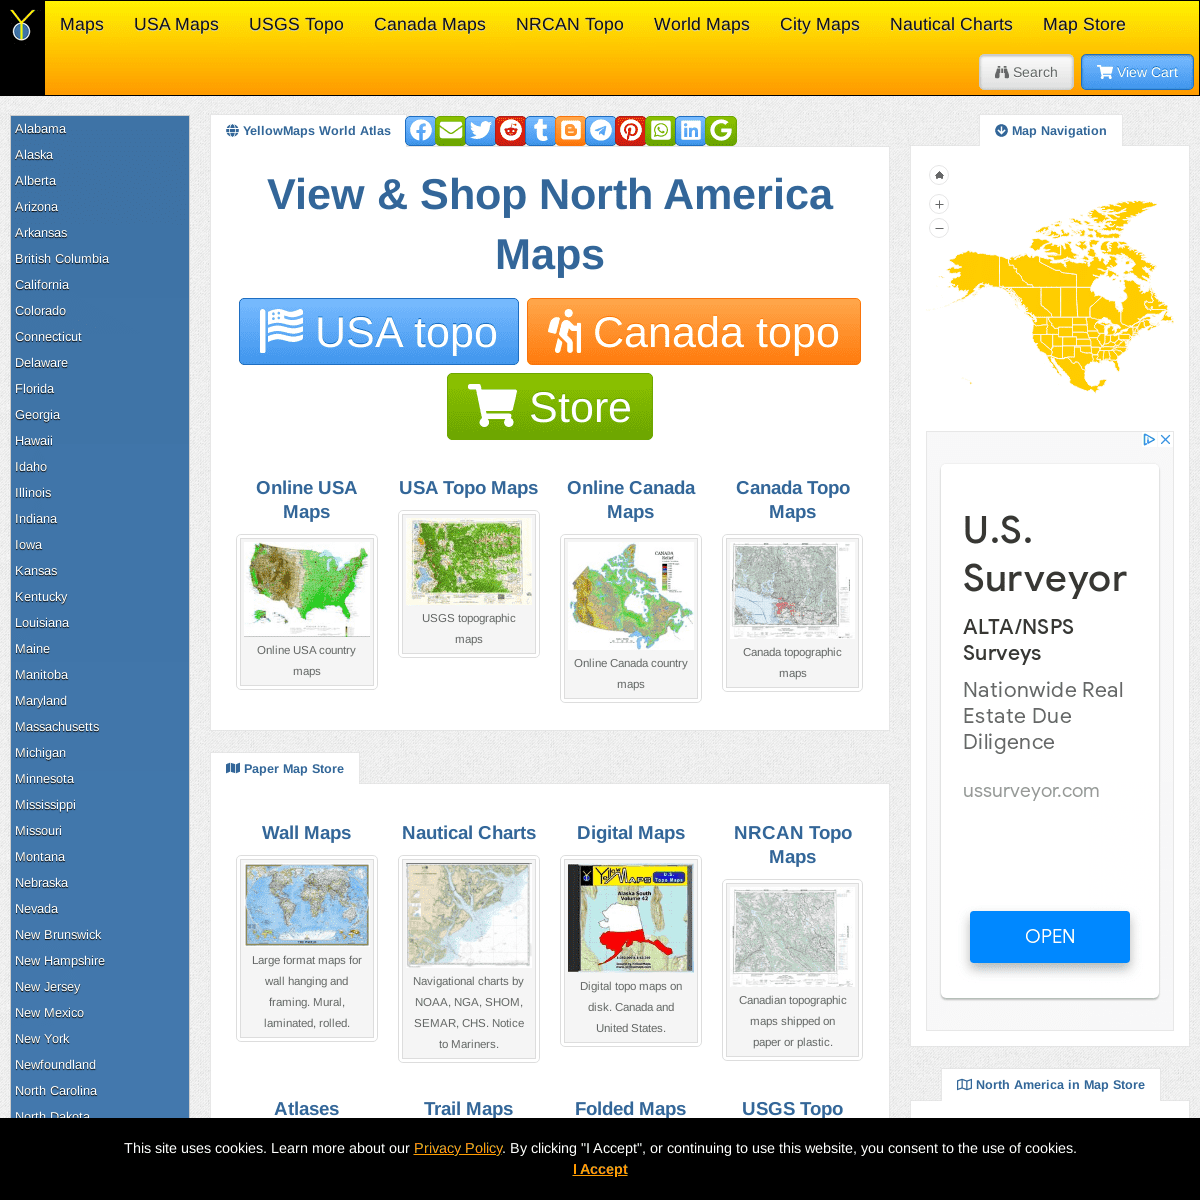 A complete backup of https://yellowmaps.com